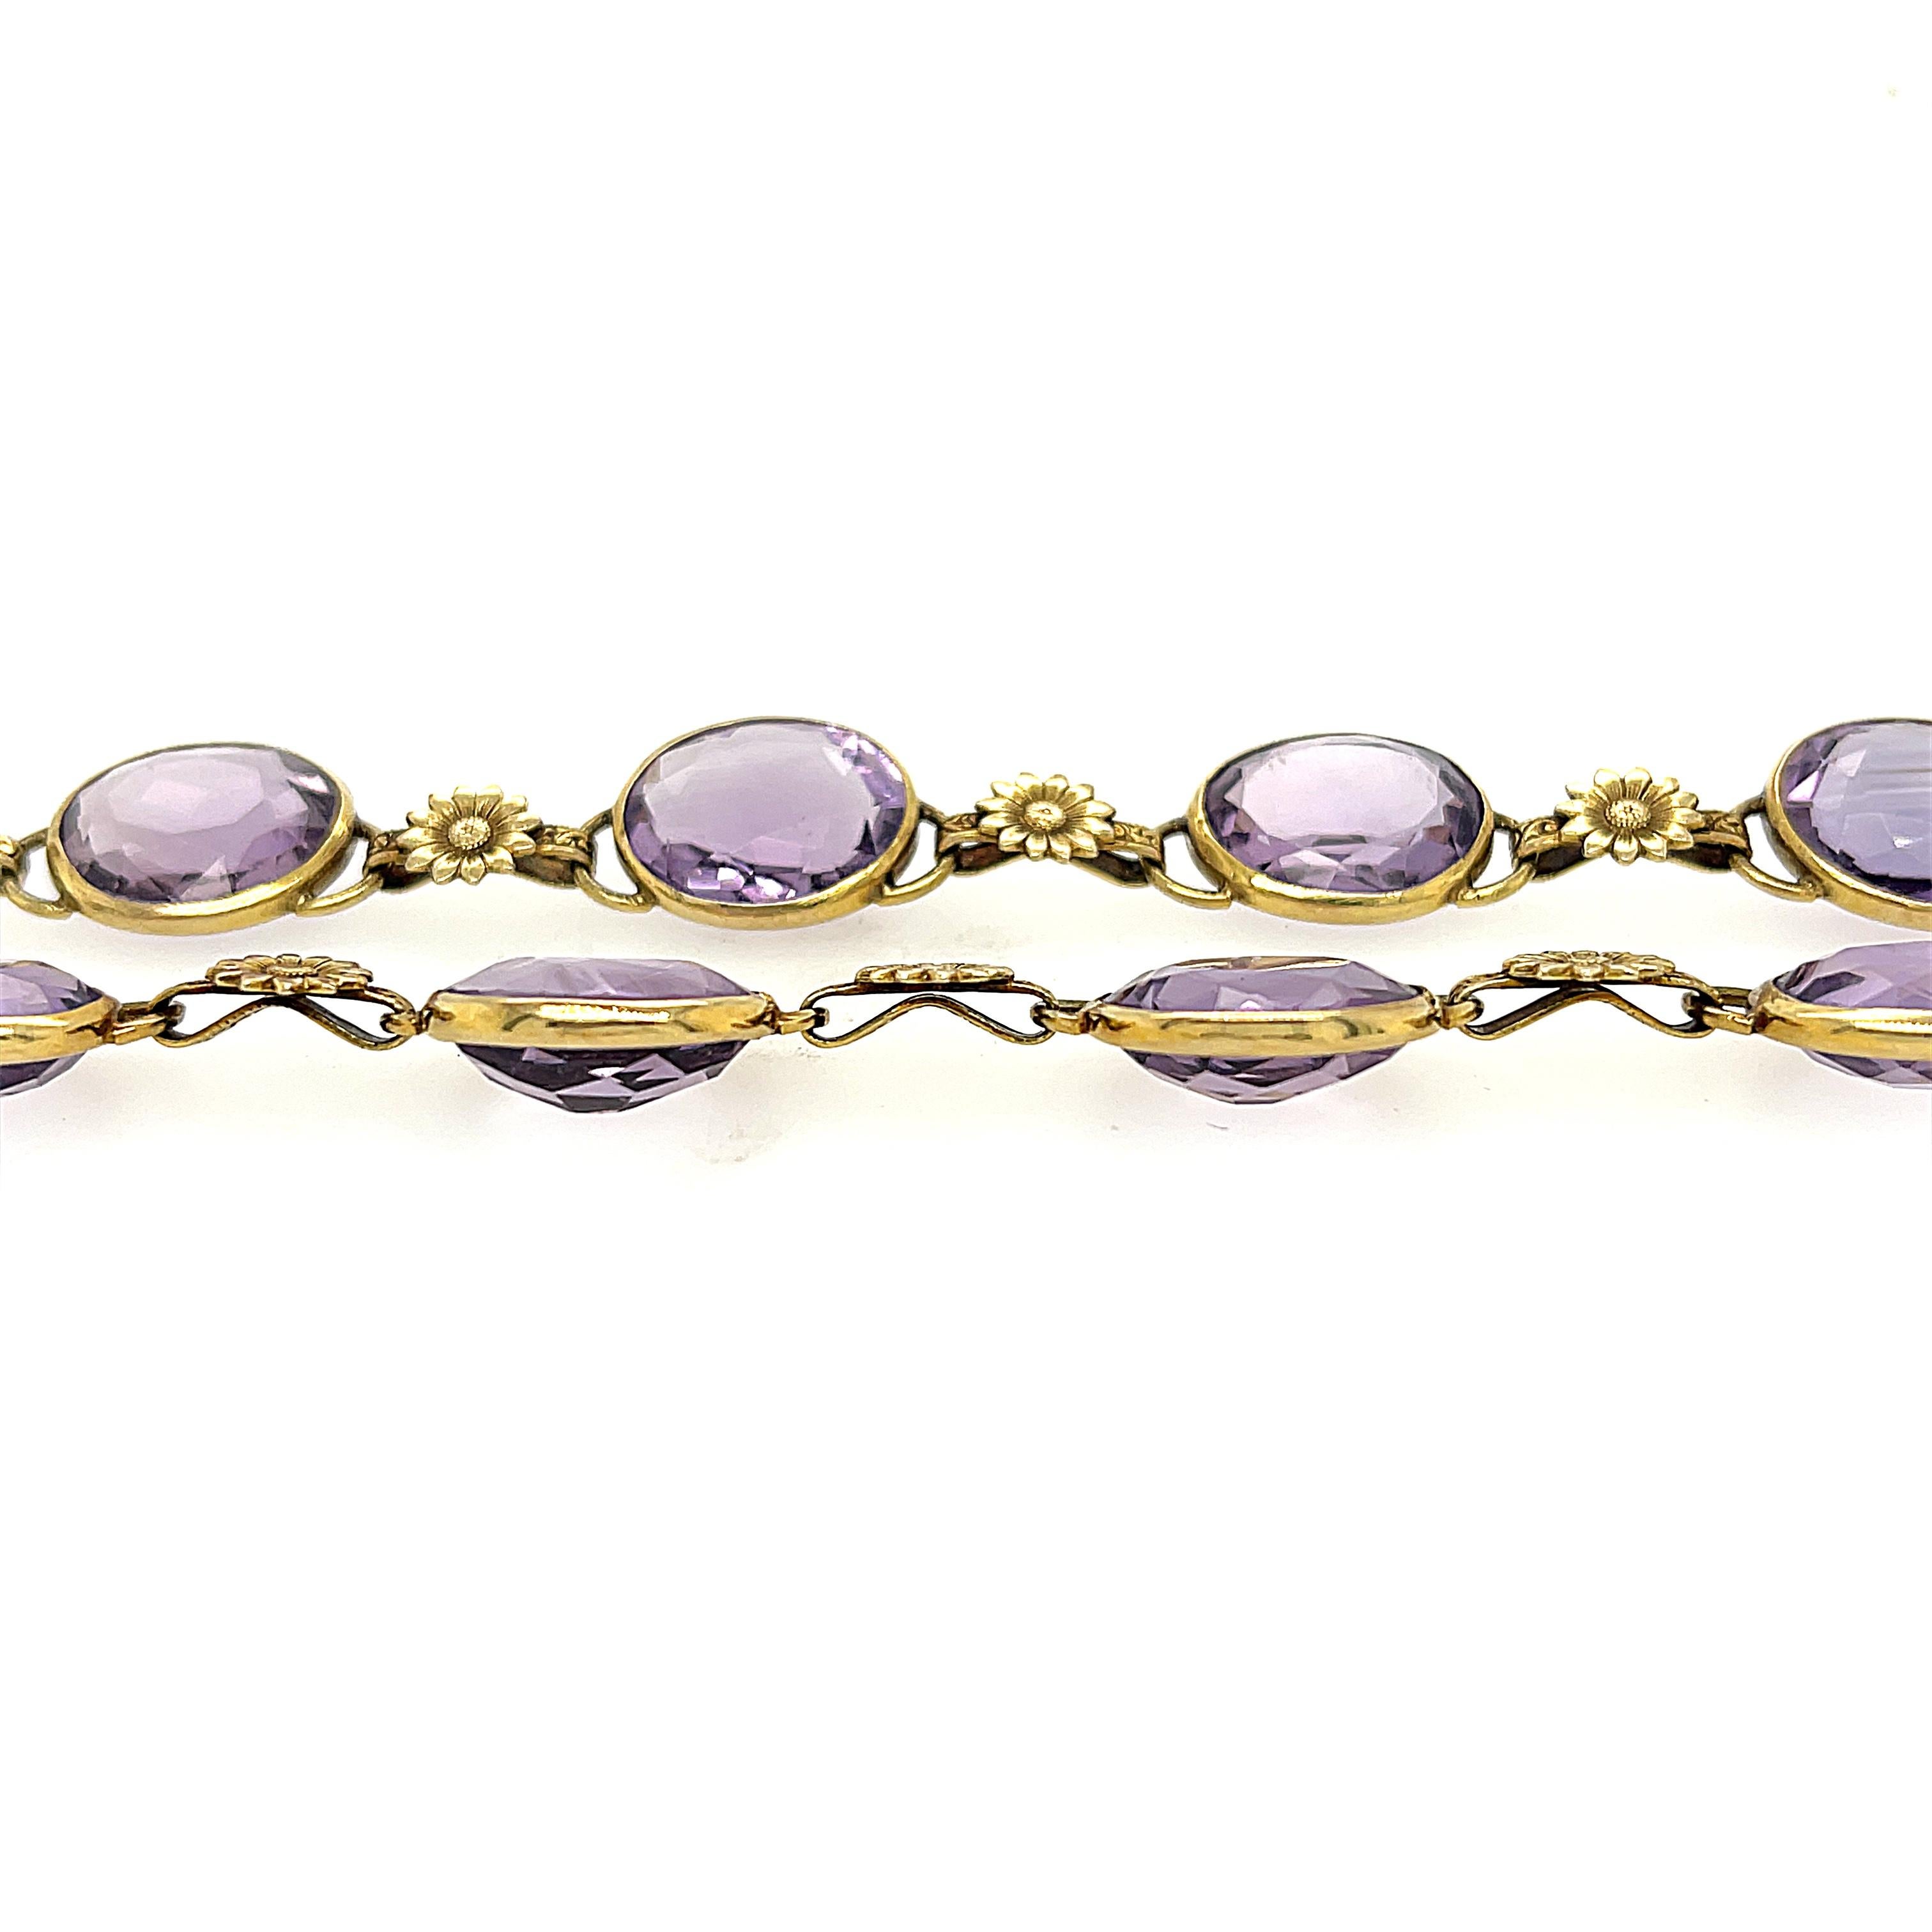 A pretty pastel colored amethyst necklace with gold sunflower spacers set in 14k gold, circa 1950. This happy necklace is set with gorgeous pinky purple amethysts with gold sunflowers in between. The necklace is 16 inches long with a tongue clasp. 